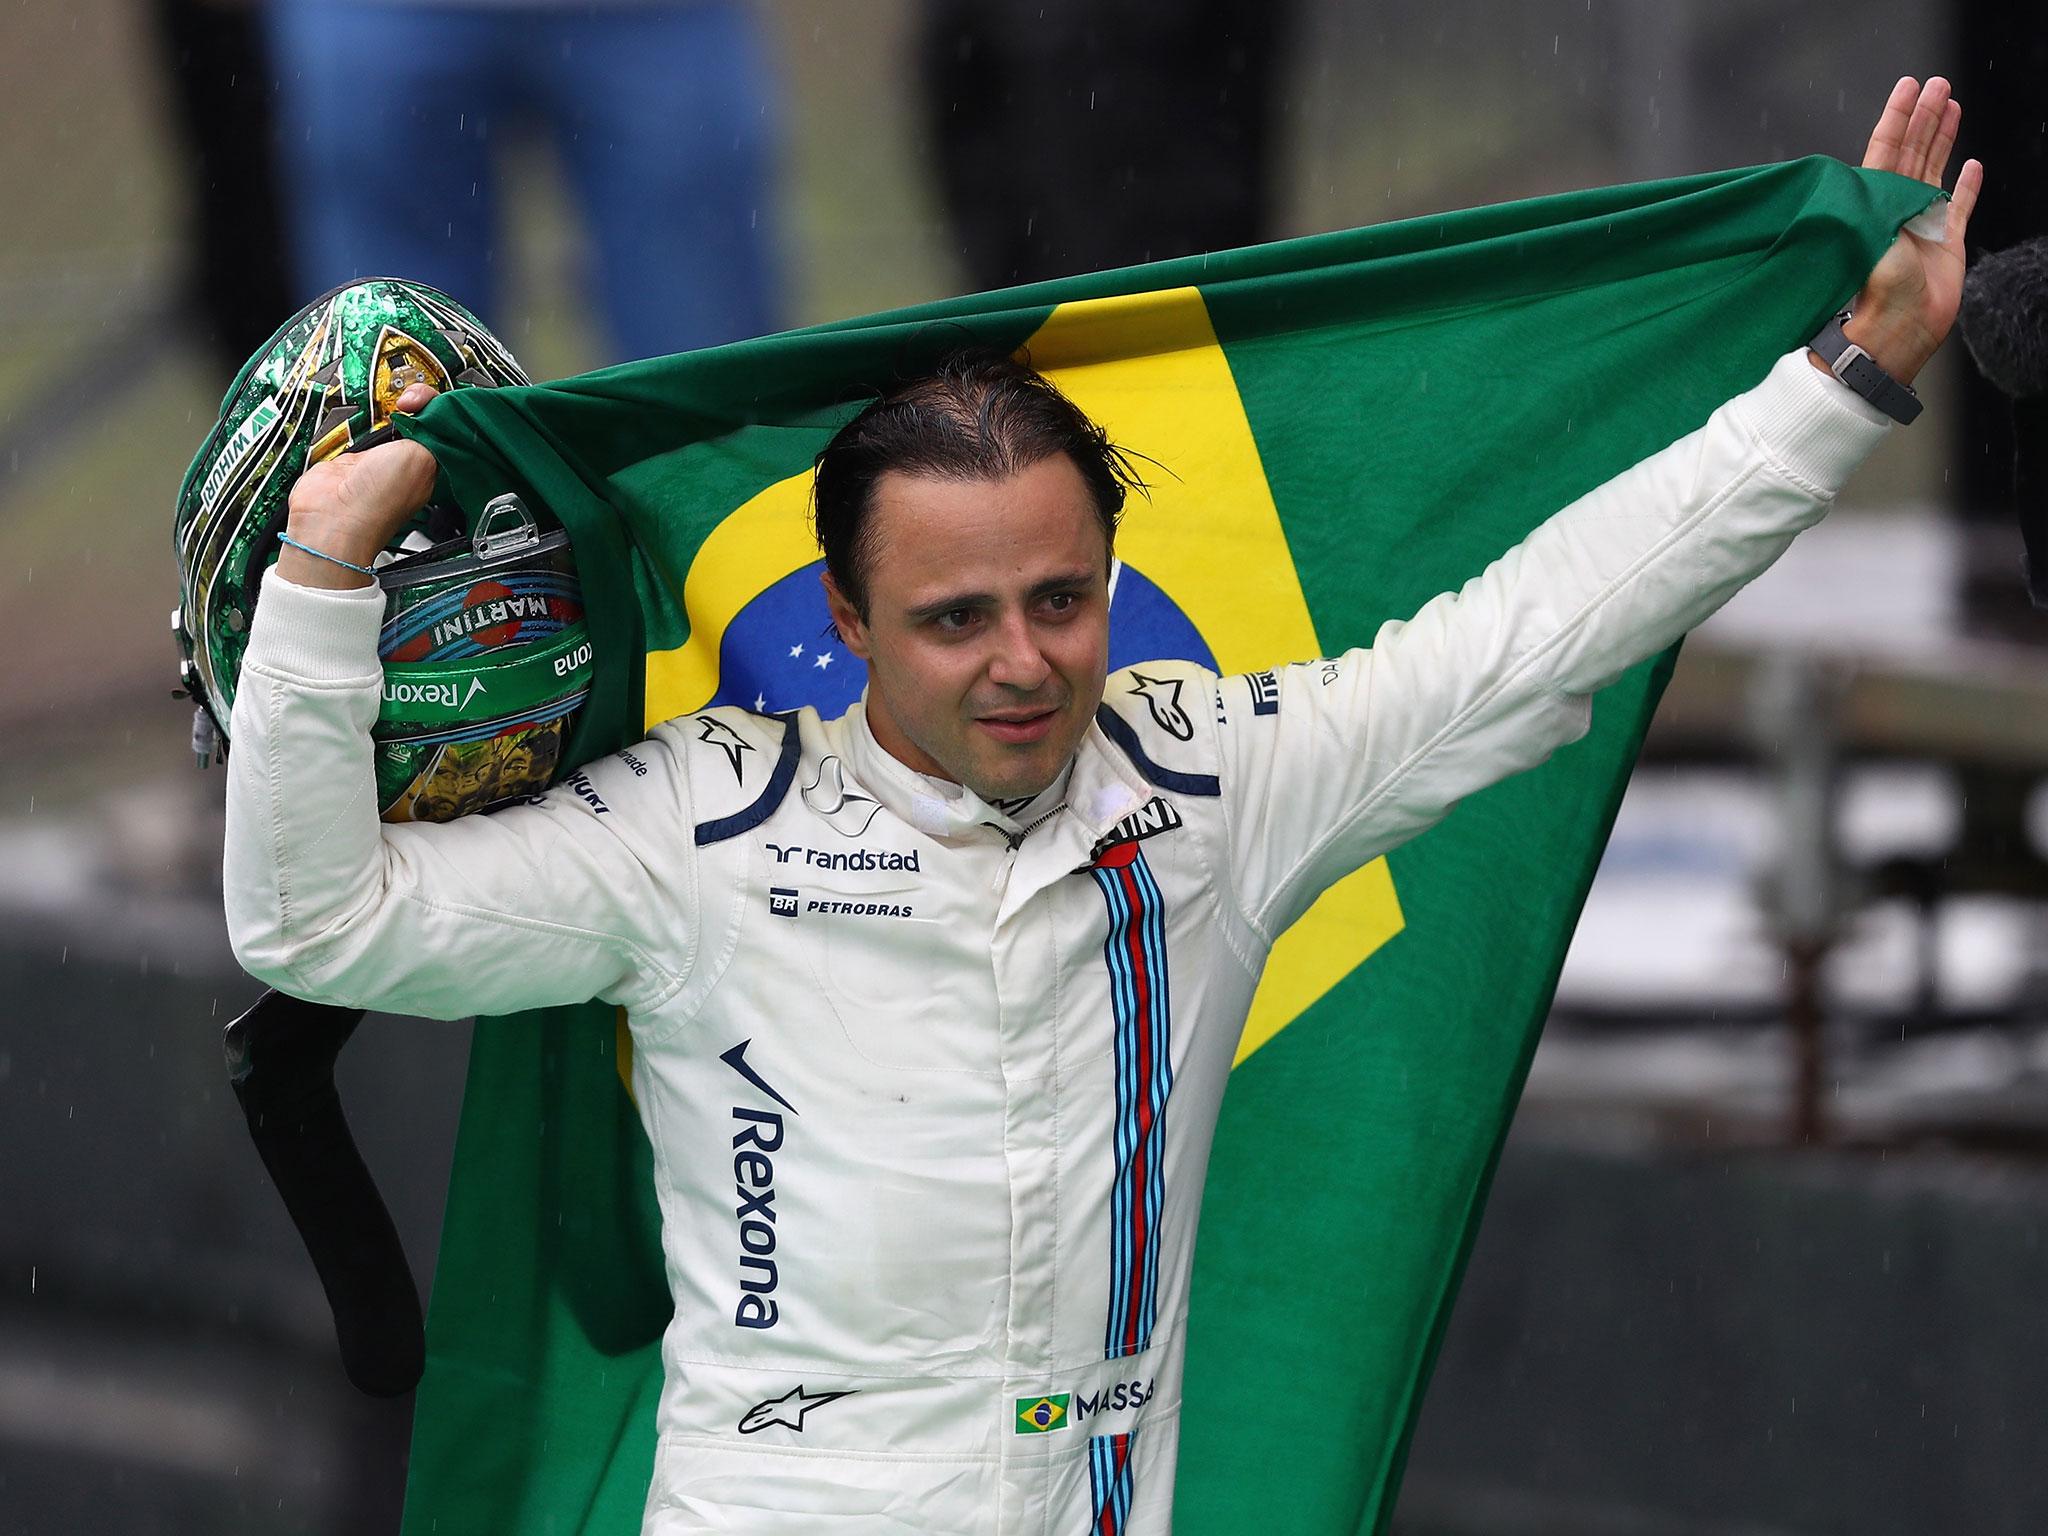 Williams hinted they would let Bottas leave if Massa returned